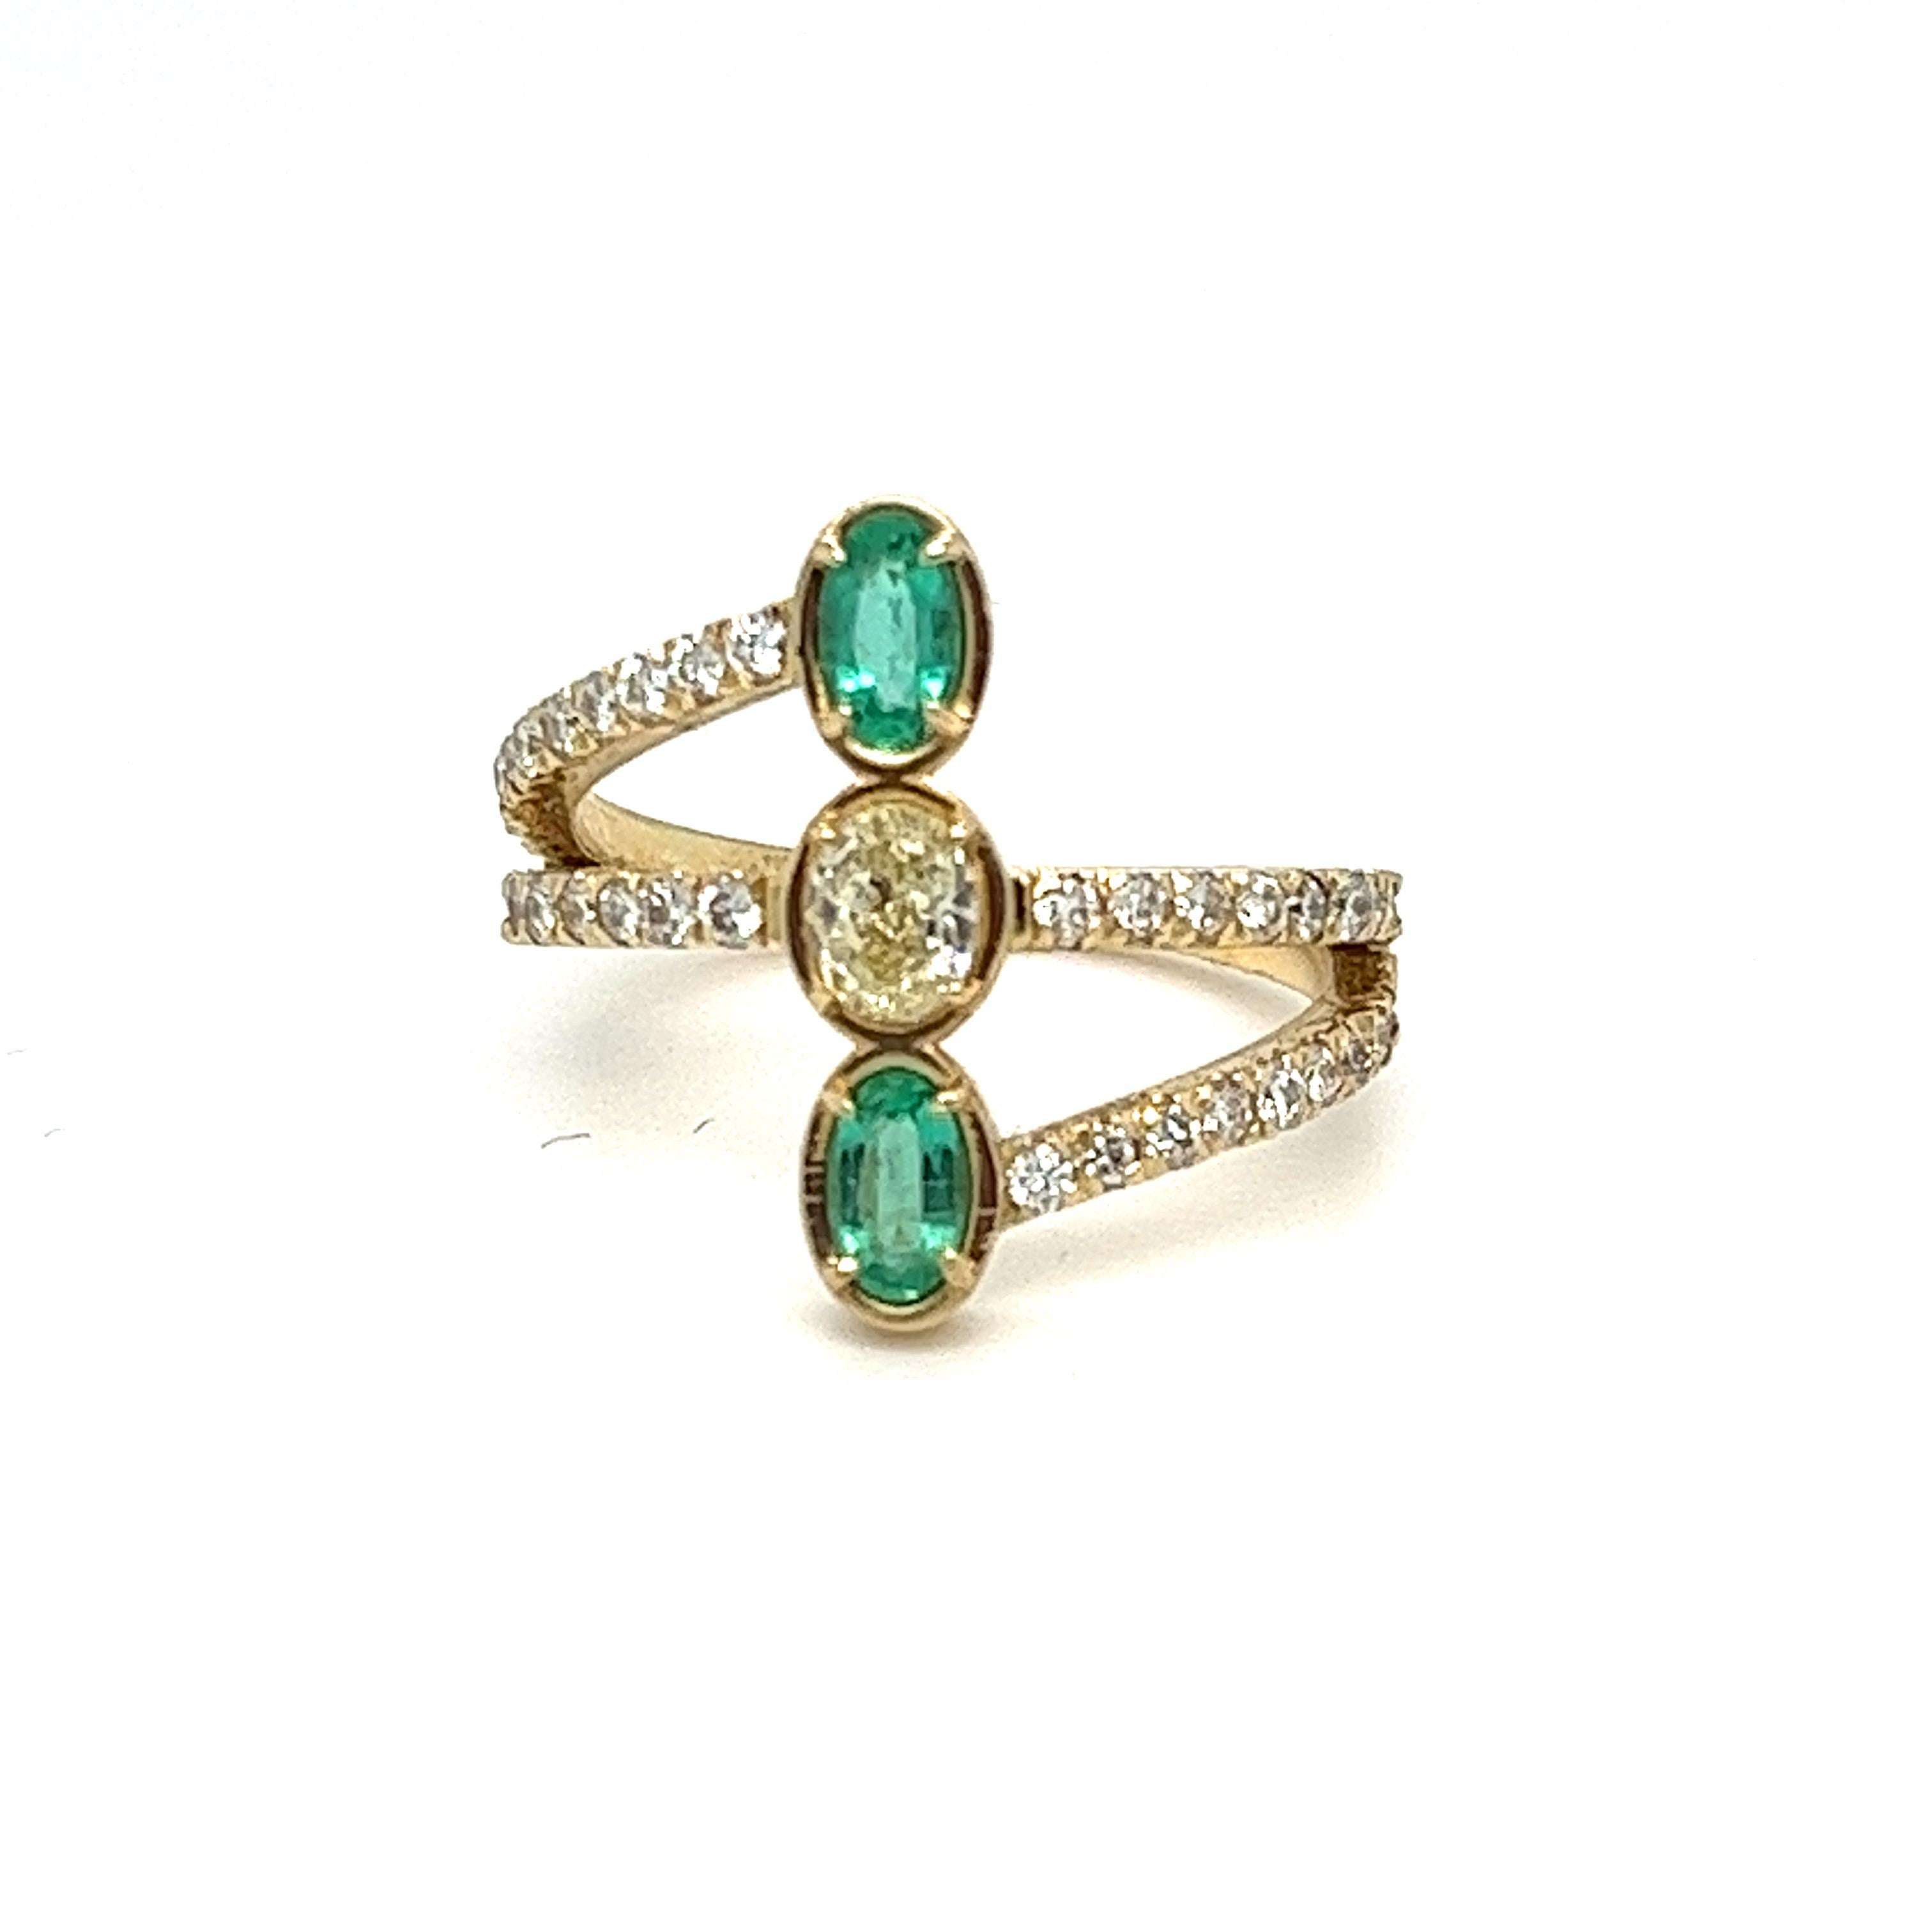 Elevate your style with this exquisitely designed and handcrafted ring, a true masterpiece from our boutique office in Miami, Florida. This delicate yet elegant piece features a natural earth-mined yellow oval-shaped diamond at its center, weighing